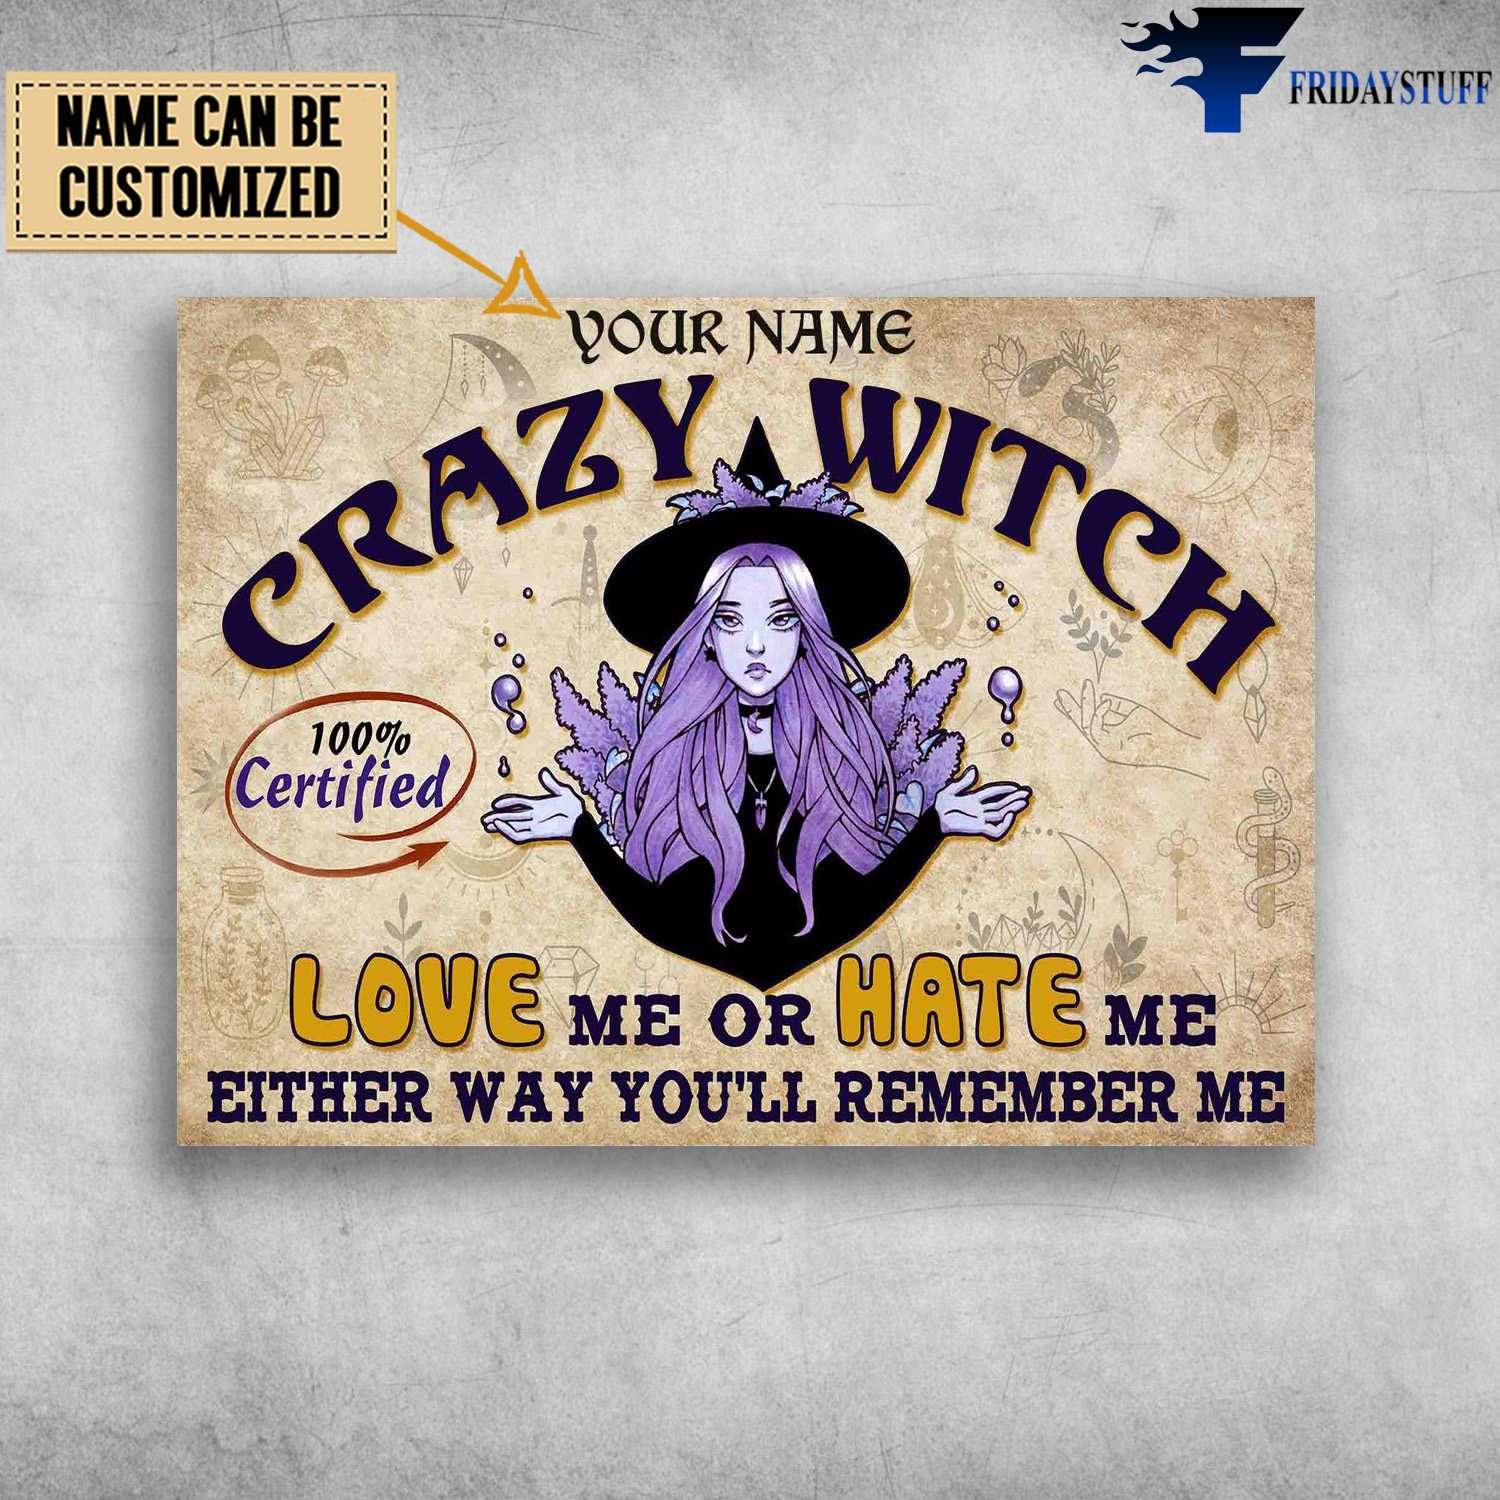 Crazy Witch, 100% Certified, Love Me Or Hate Me, Either Way You'll Remember Me